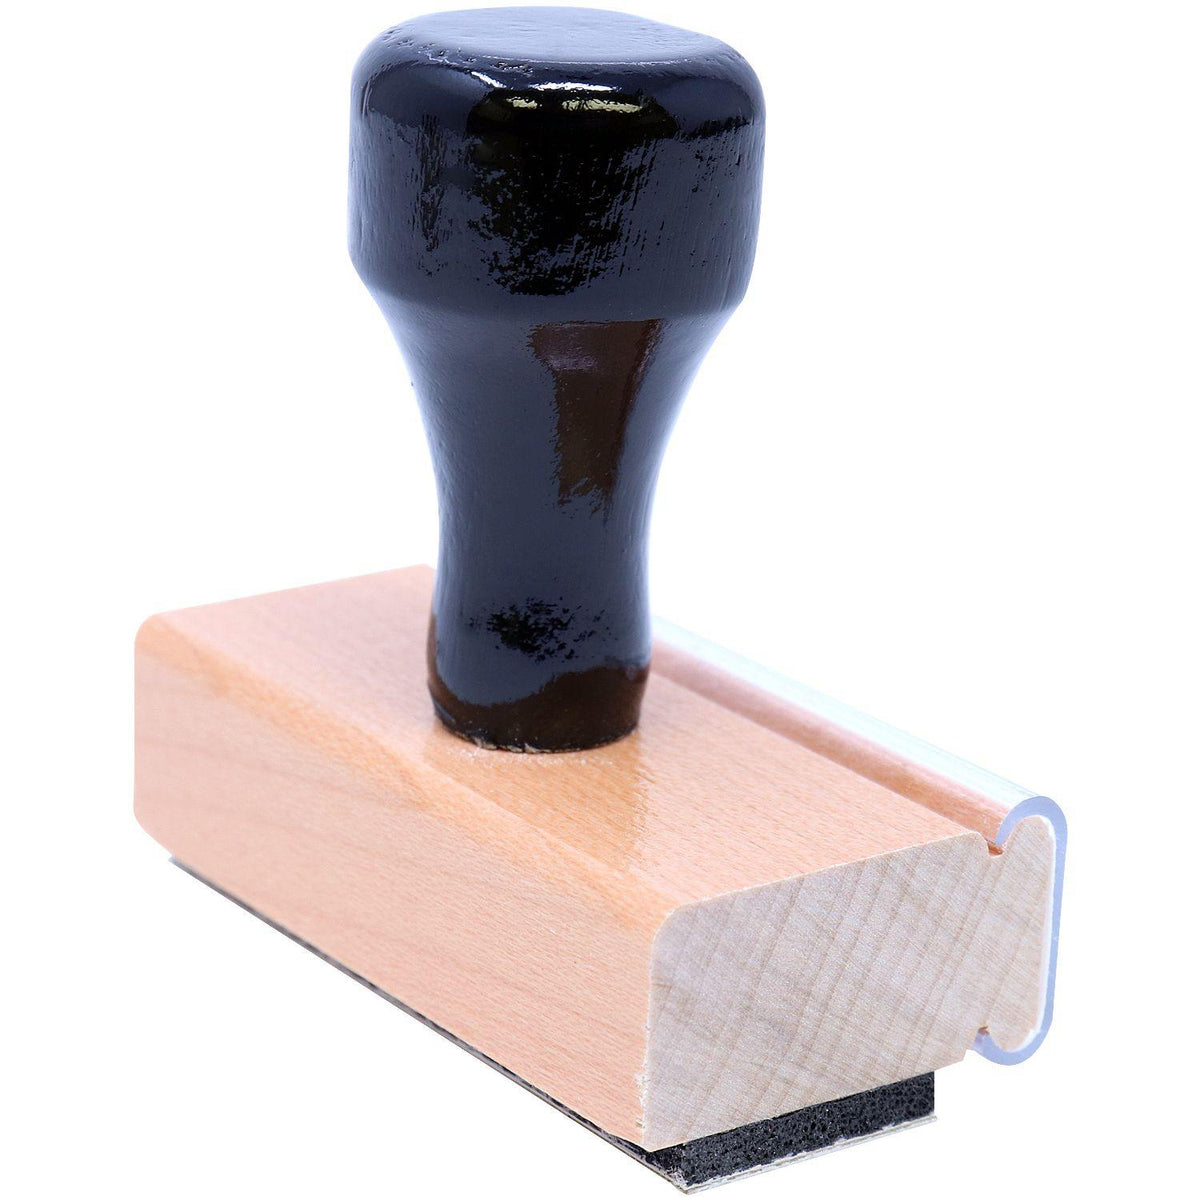 Large Void Rubber Stamp - Engineer Seal Stamps - Brand_Acorn, Impression Size_Large, Stamp Type_Regular Stamp, Type of Use_Office